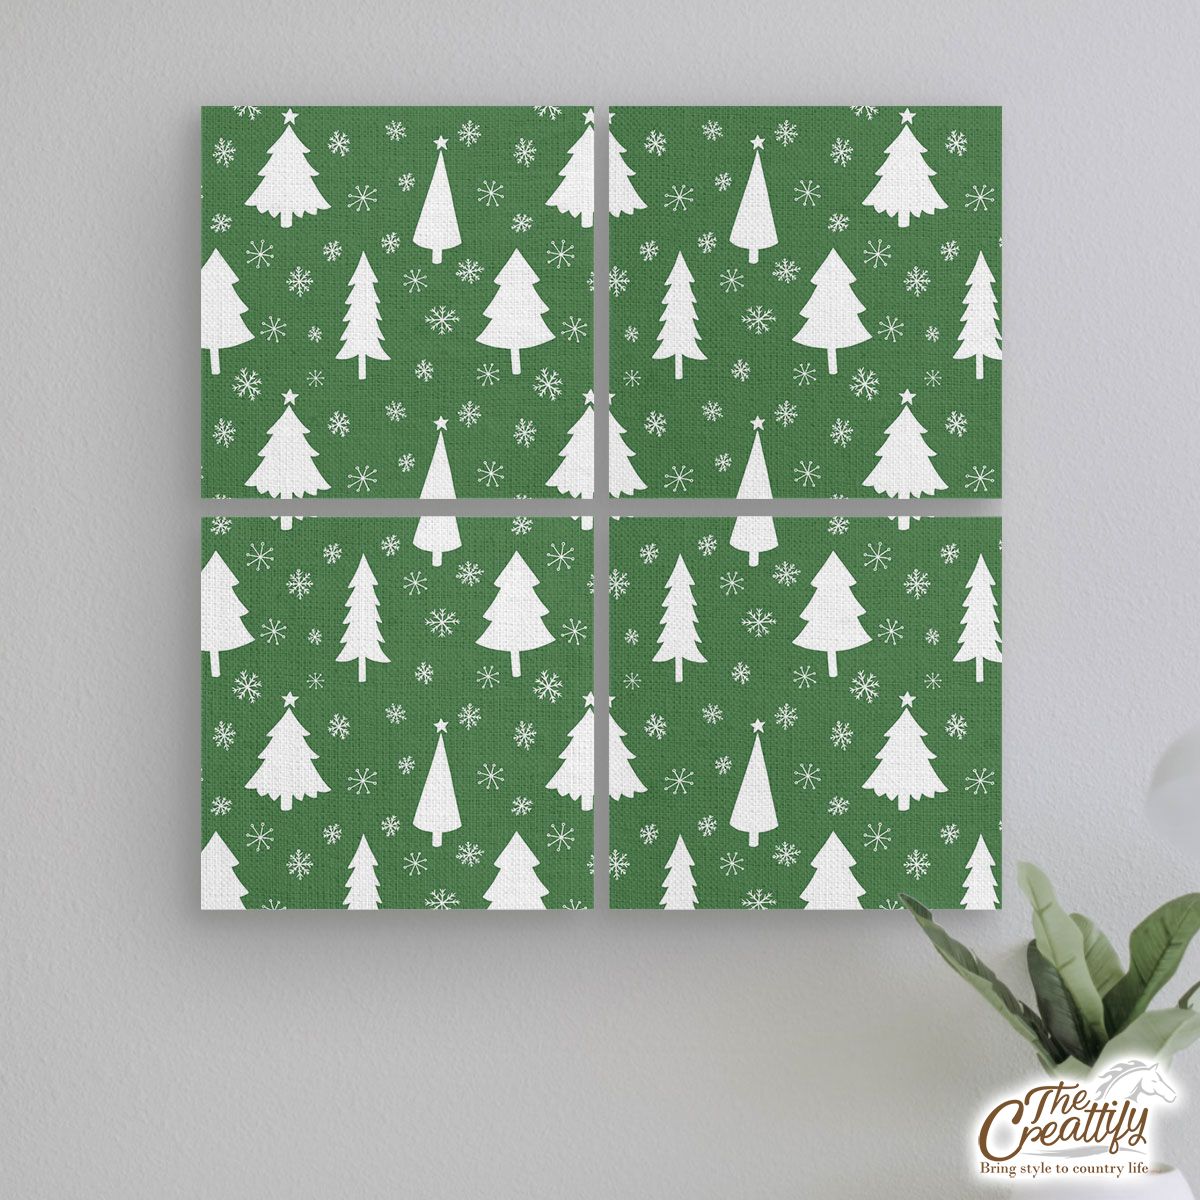 Green And White Christmas Tree With Snowflake Mural With Frame